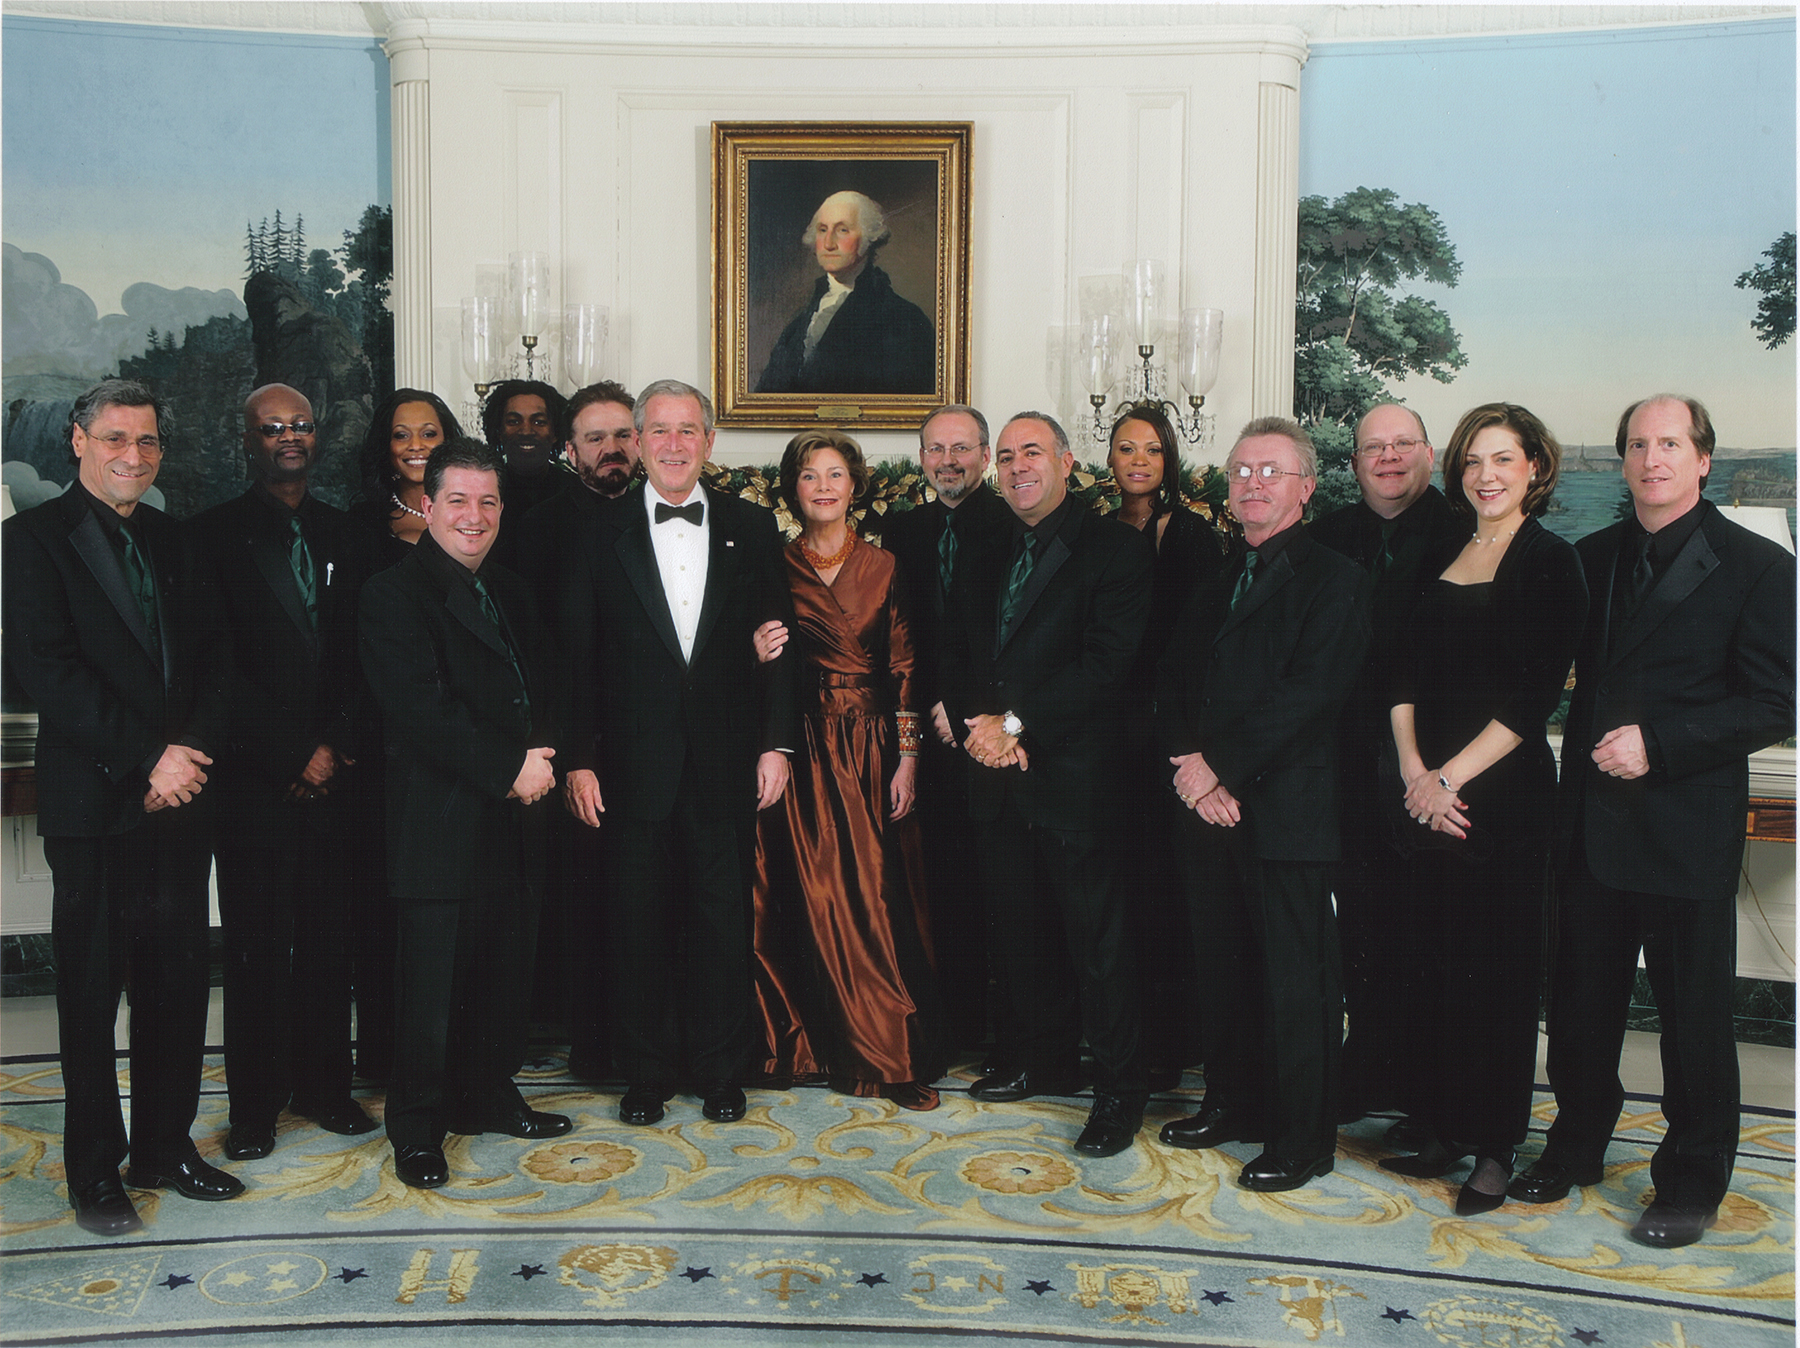 Jellyroll Has the Honor of Performing for President George W. Bush at the White House